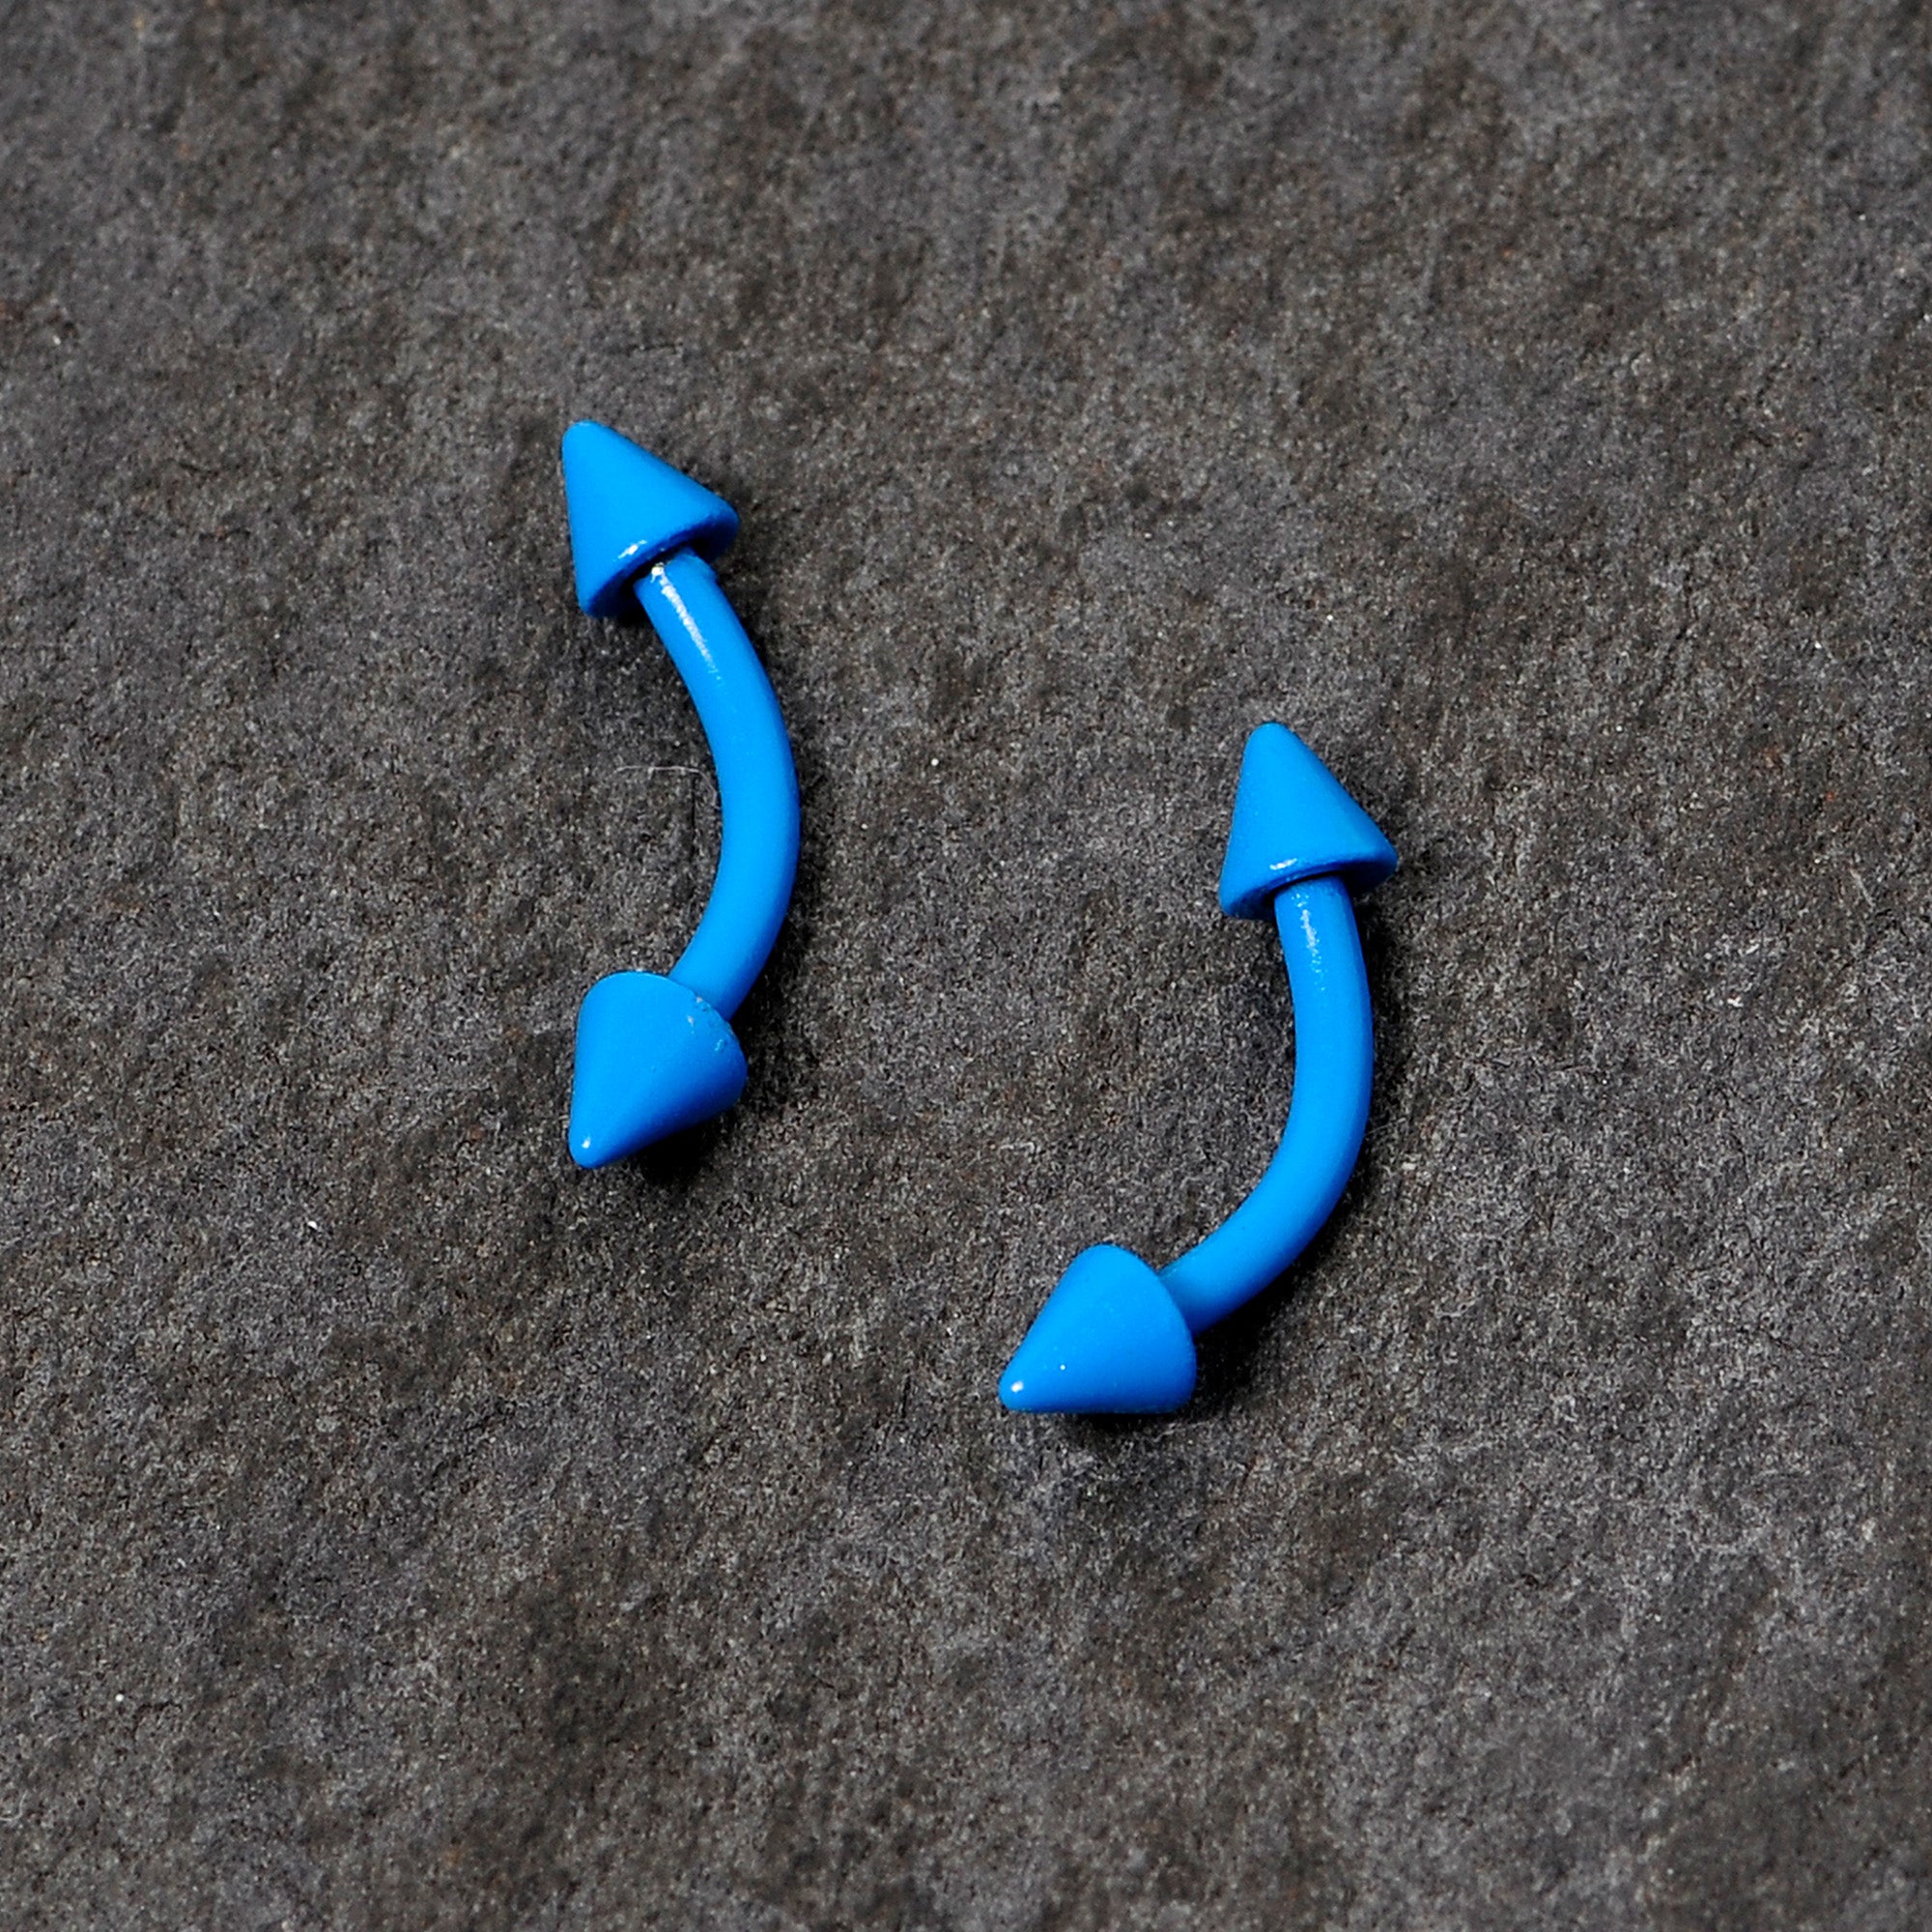 16 Gauge 5/16 Blue Glow in the Dark Cone End Curved Barbell Set of 2